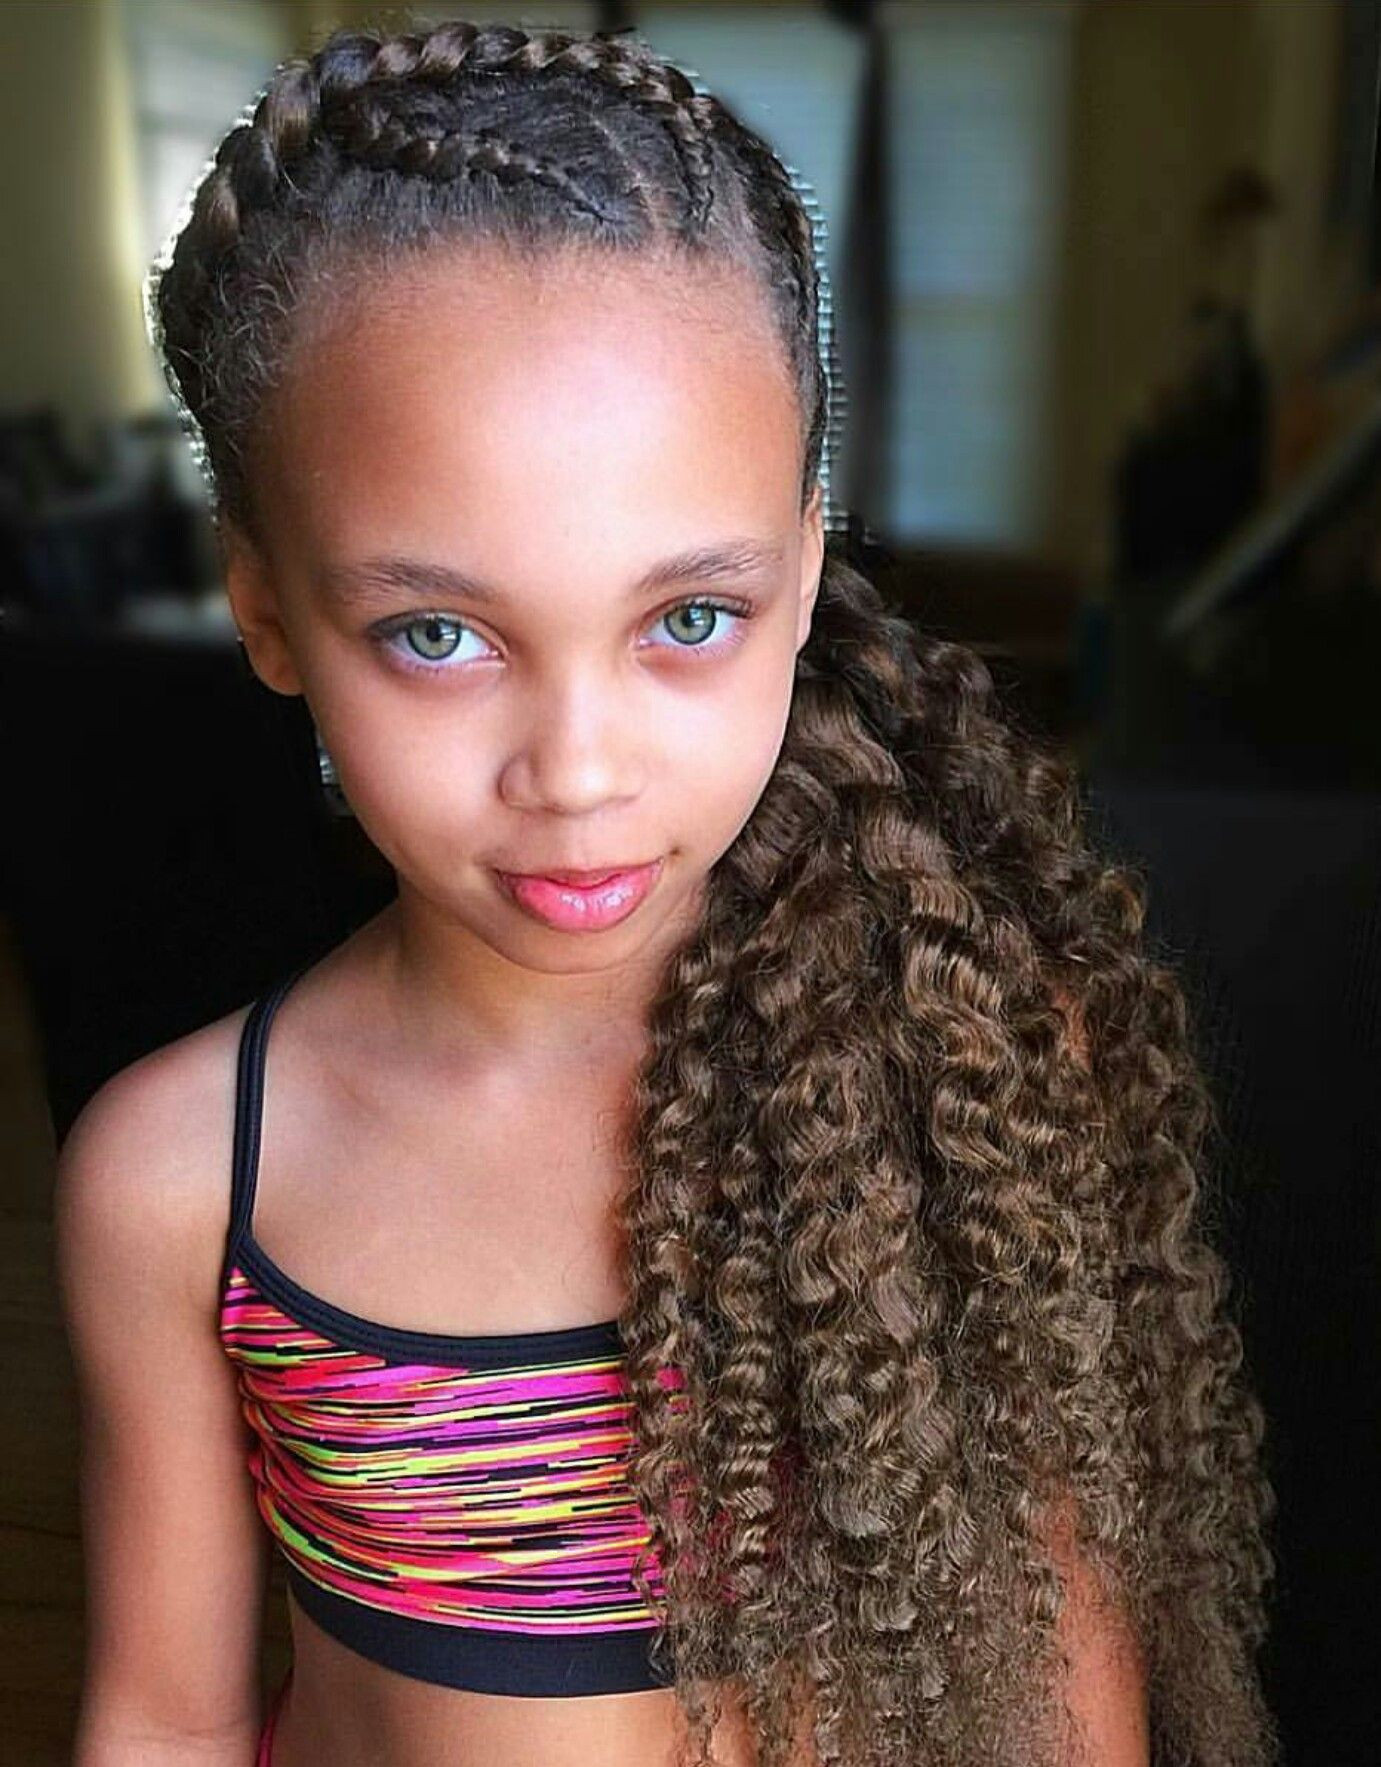 The 25 Best Ideas for Mixed Kids Hairstyles - Home, Family, Style and